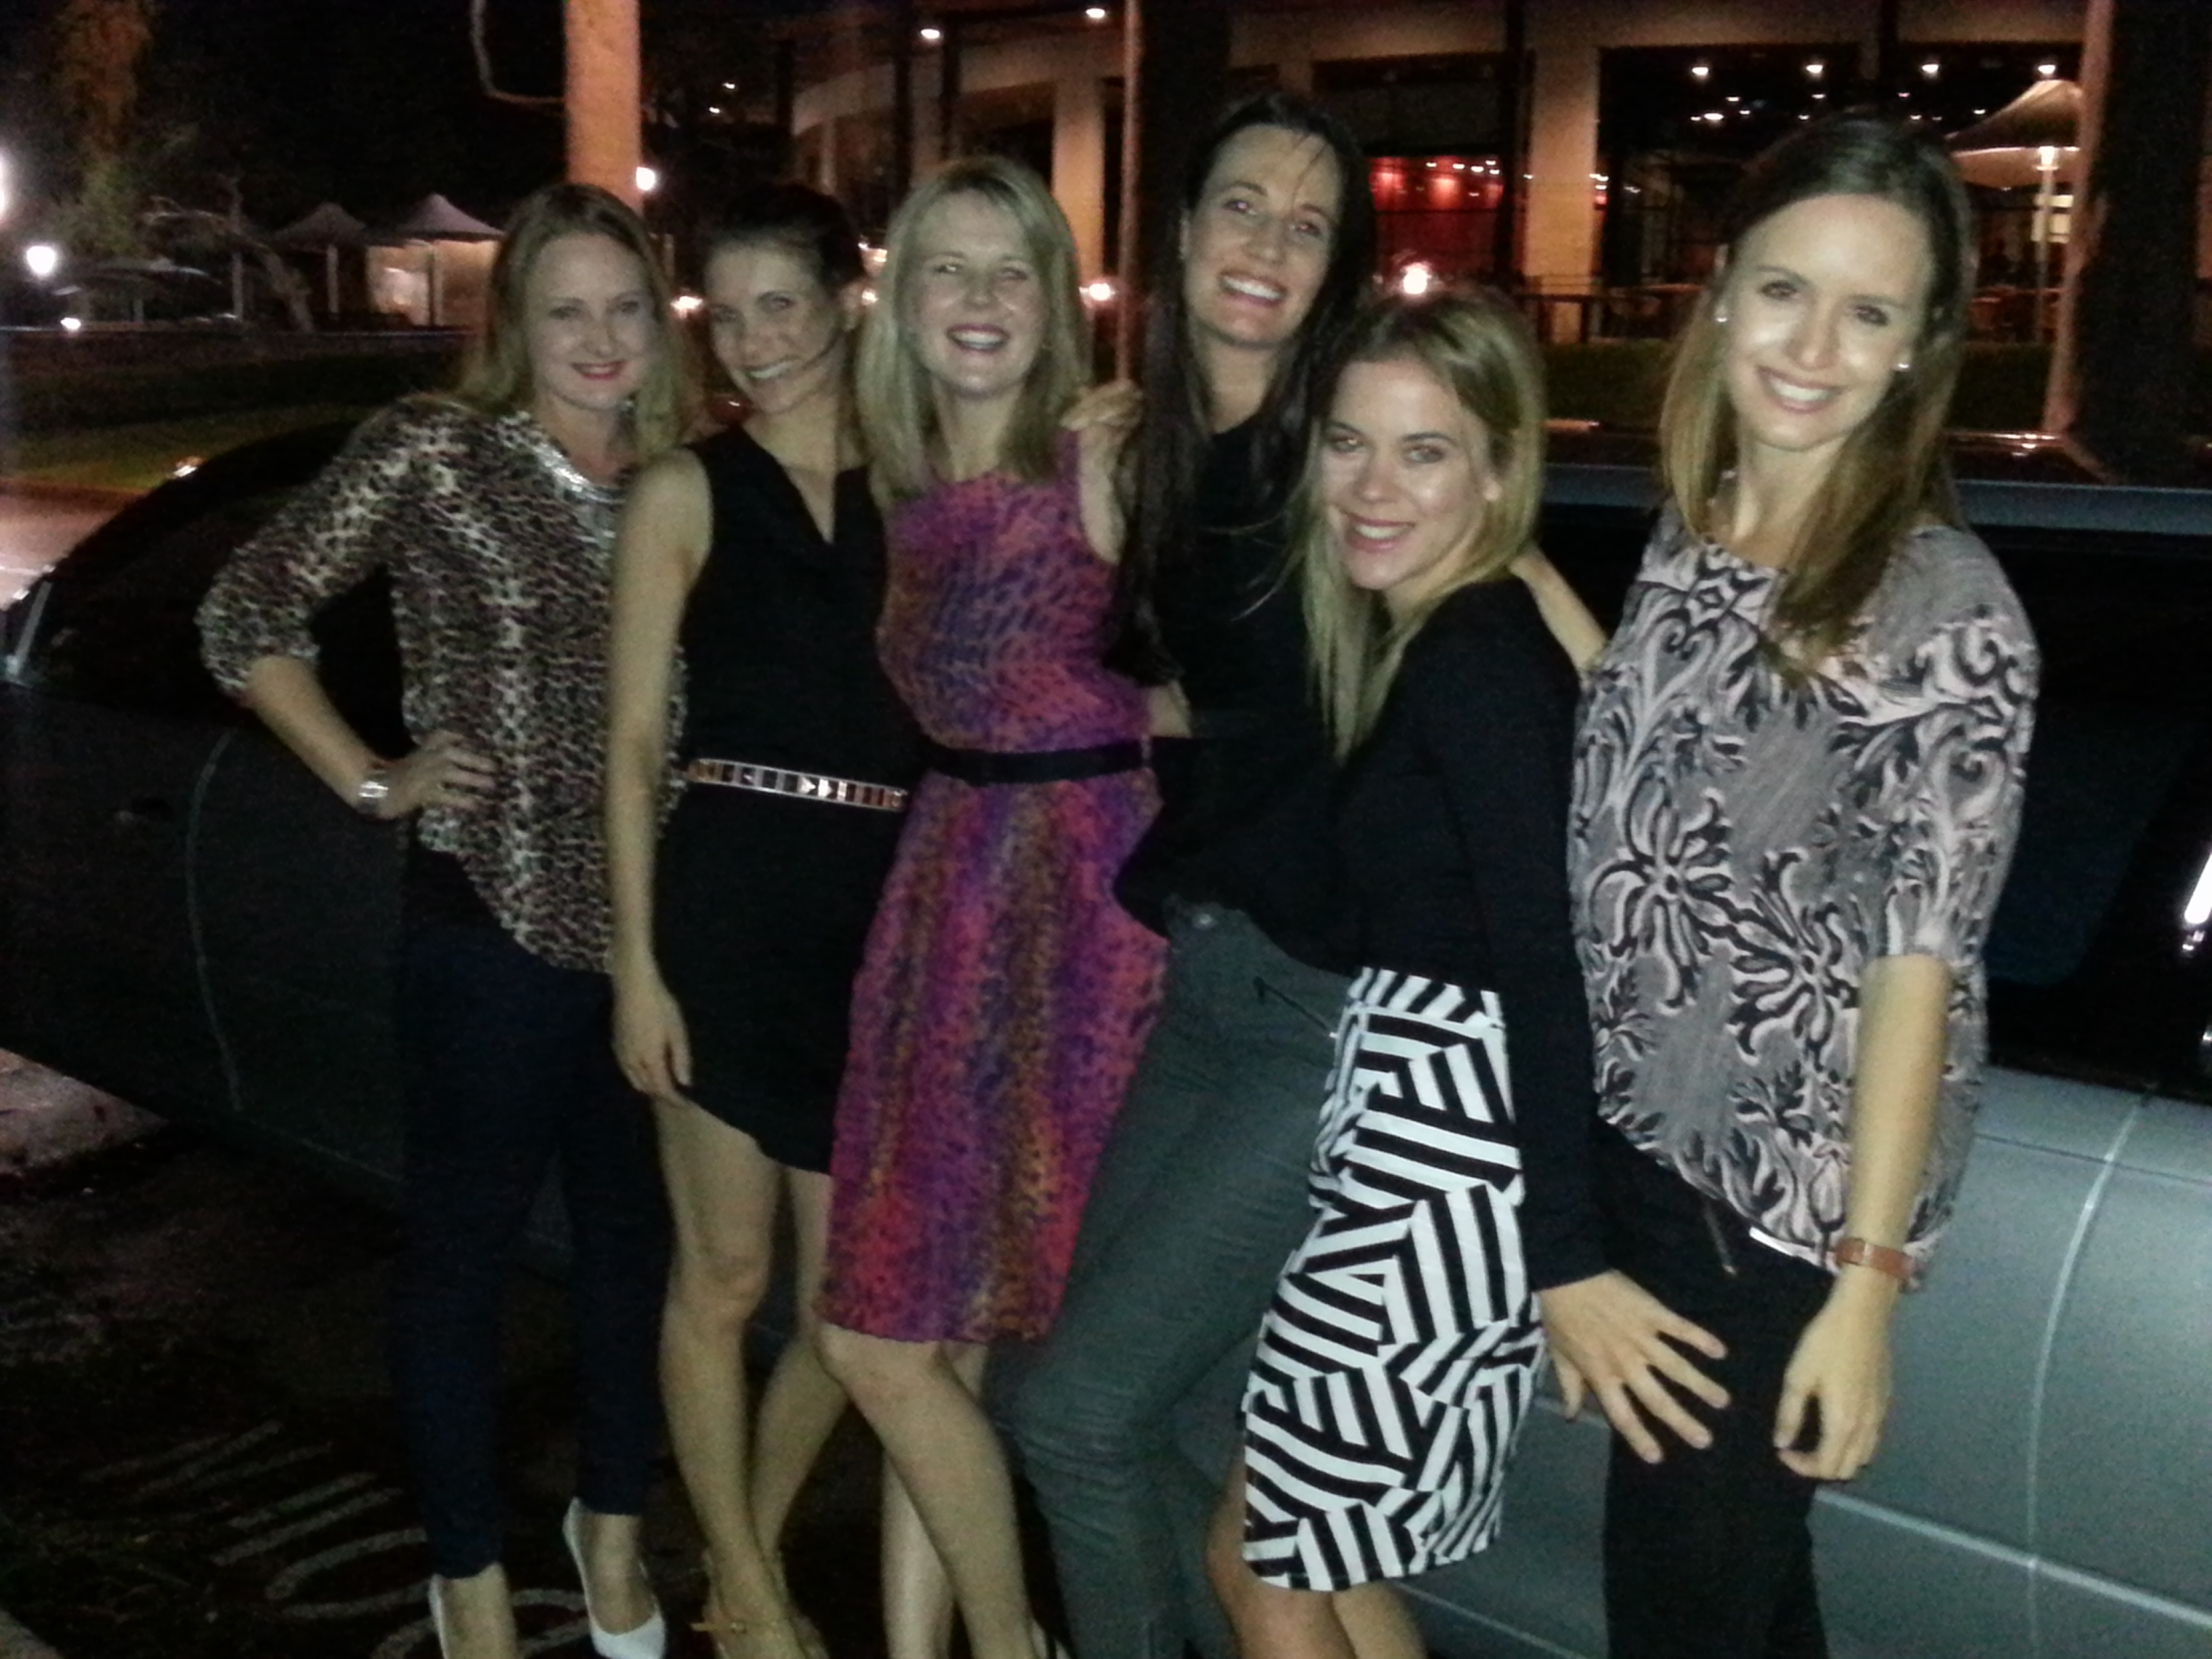 Wedding limousine hire Perth night out for these lively ladies